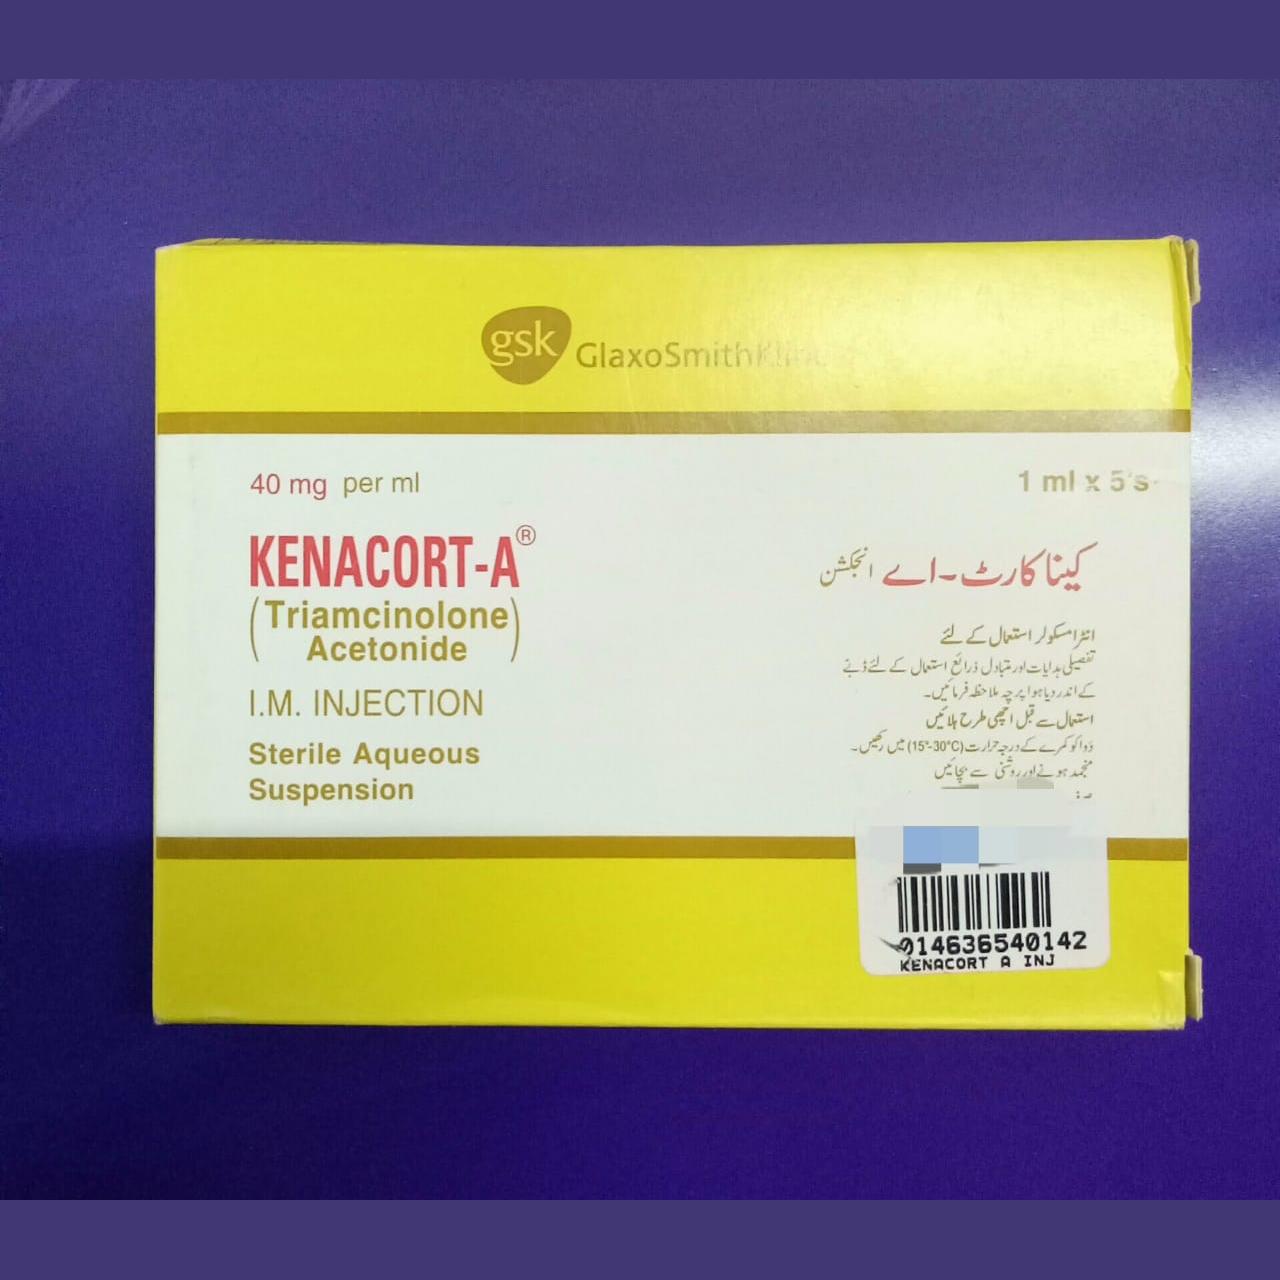 KENACORT-A 40mg|ml Injection 1mlx5s Price in Pakistan